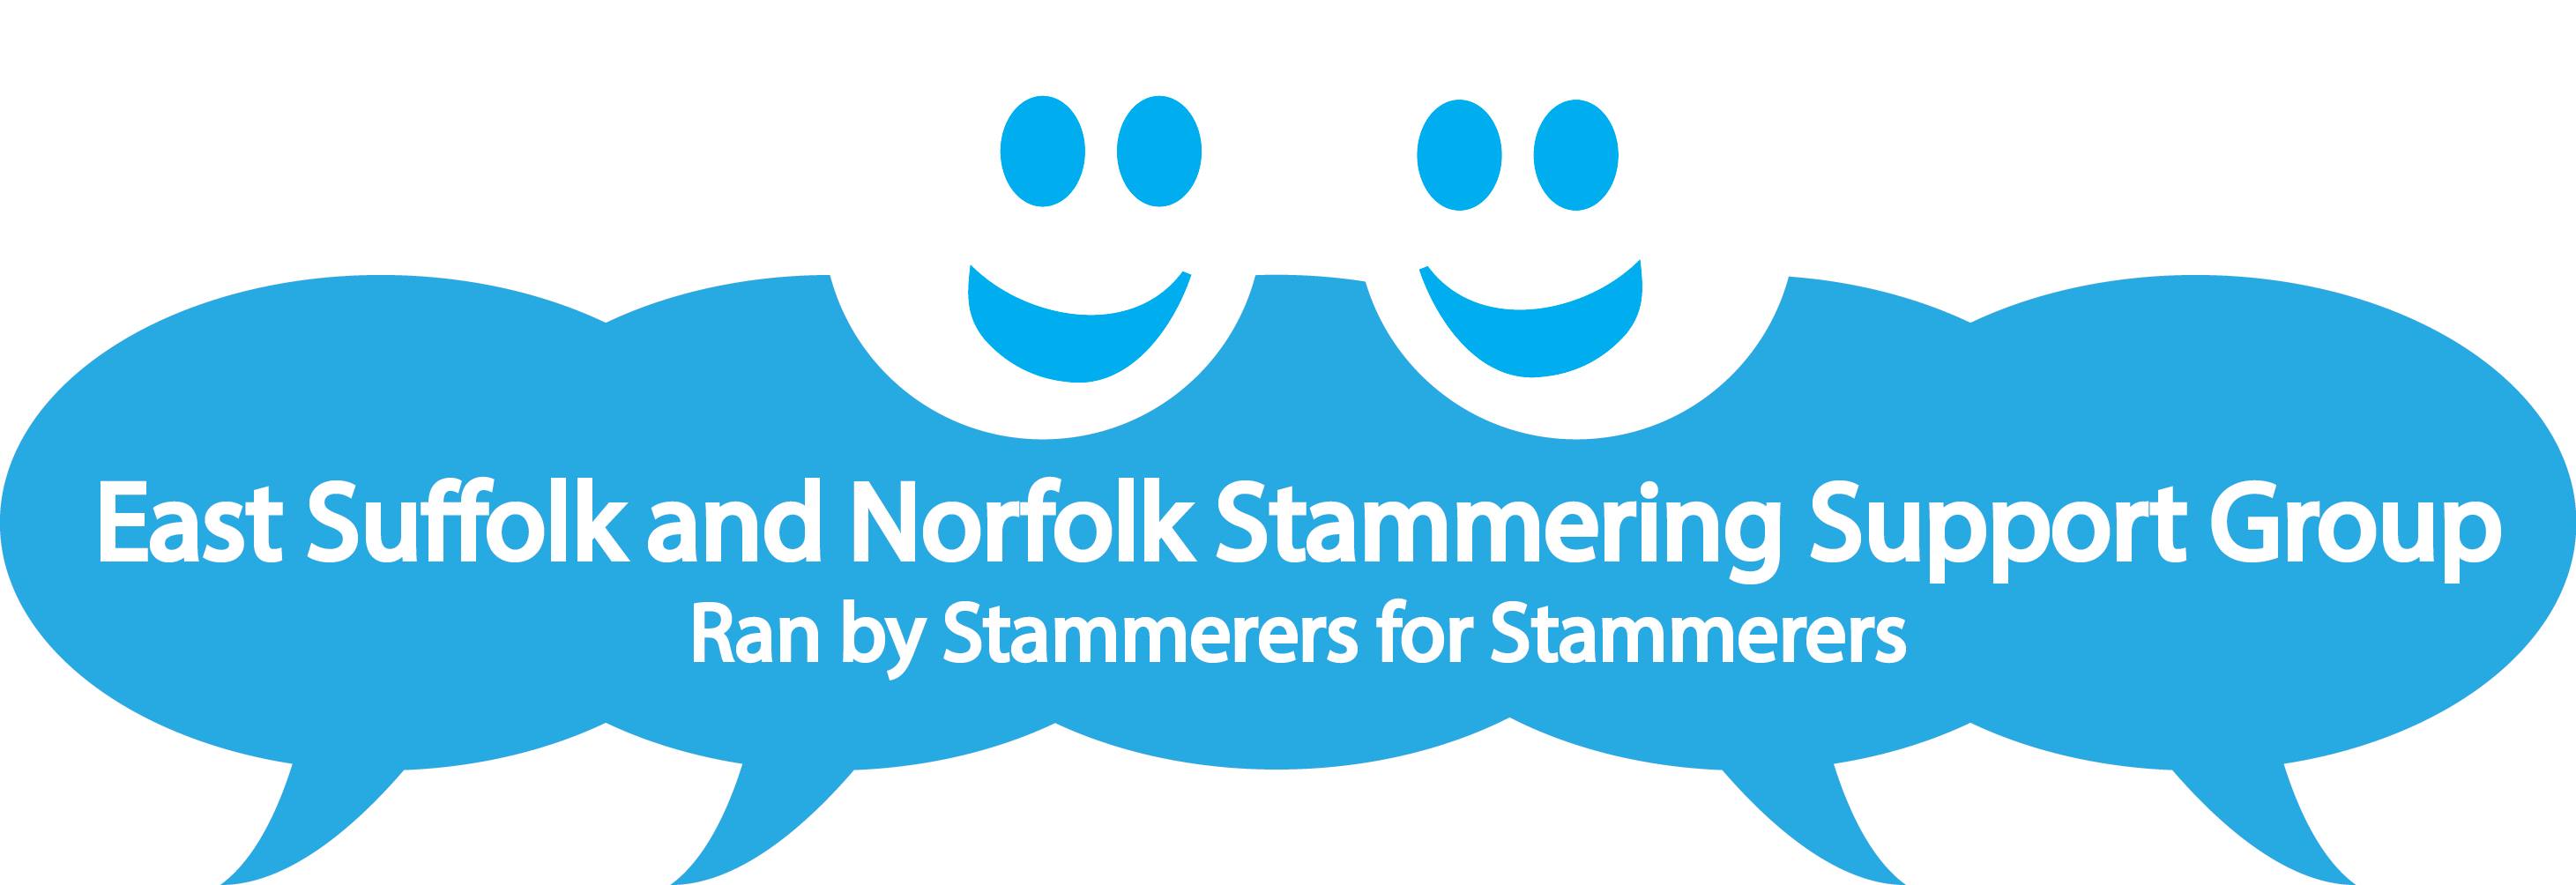 The East Suffolk & Norfolk Stammering Support Group